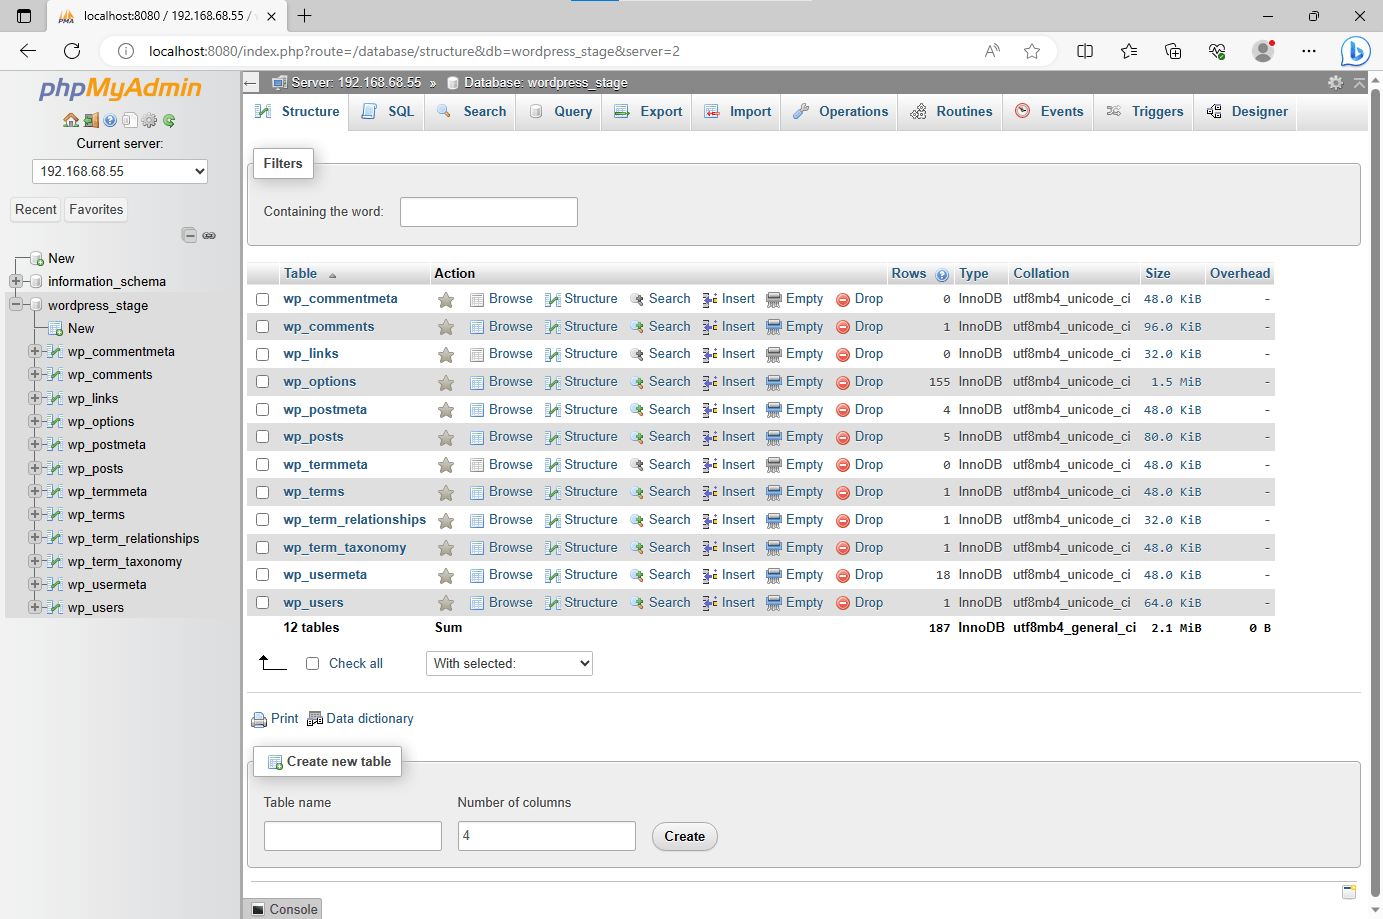 phpMyAdmin screen when logged into a remote database server